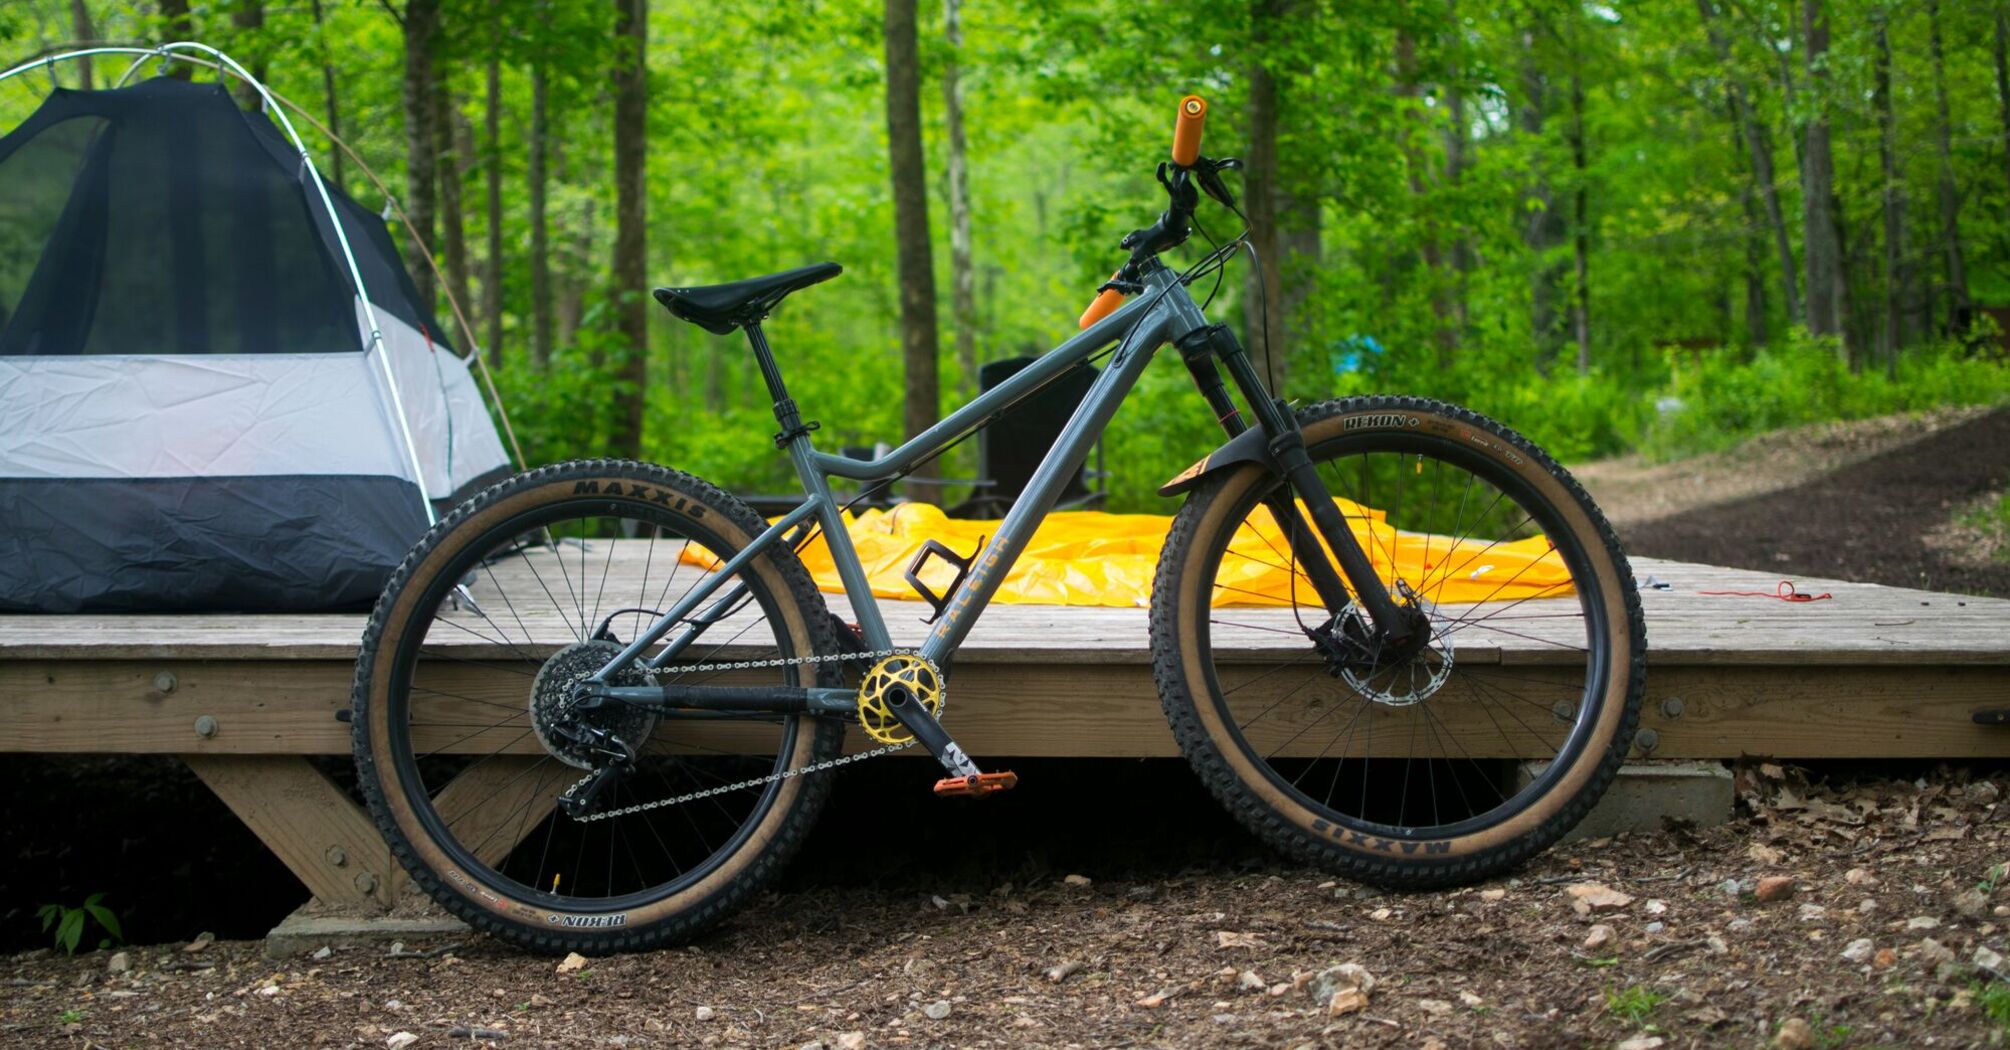 A bicycle parked on a wooden platform in the woods